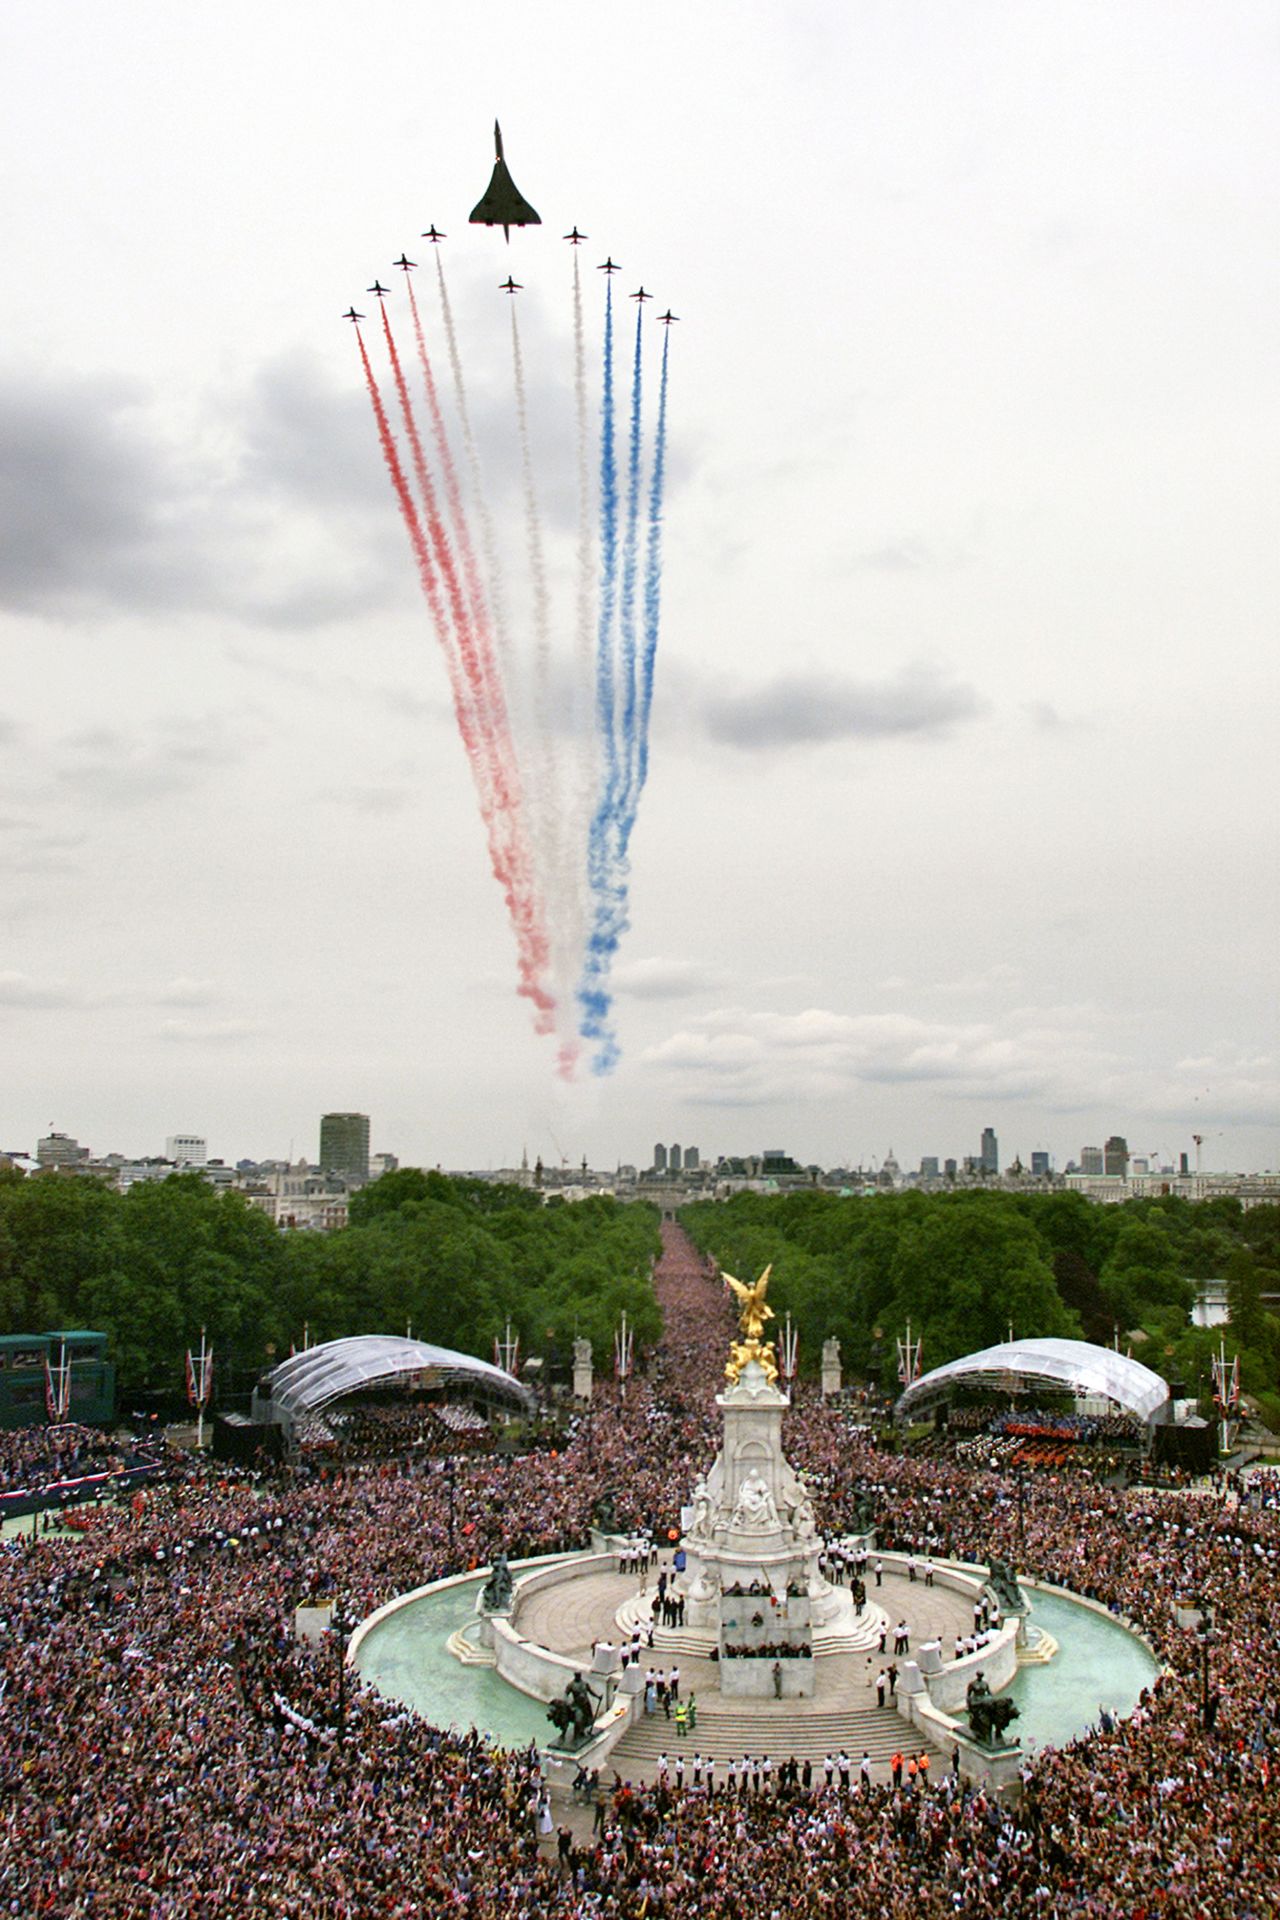 One million people gather along the Mall for the finale of the Golden Jubilee celebrations -- a <a href="http://www.cnn.com/2002/WORLD/europe/06/04/uk.jubilee/index.html" target="_blank">fly-past</a> over Buckingham Palace. Concorde, Tornado fighters and a new Eurofighter combat plane were among the 27 aircraft to soar over the royal residence. 